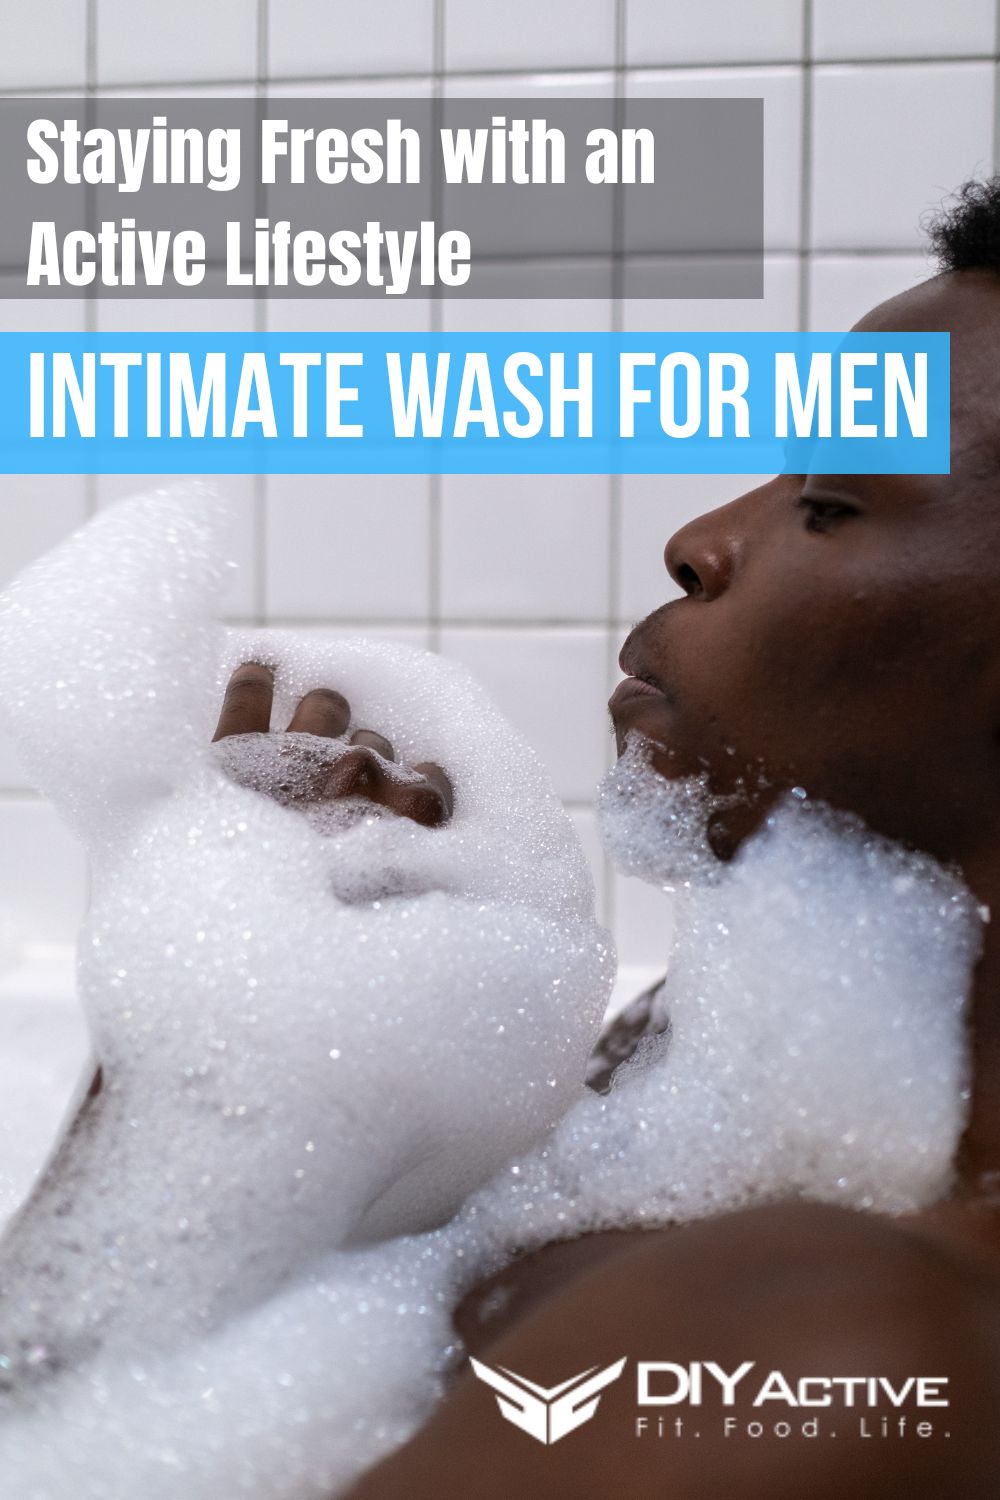 Intimate Wash for Men 2